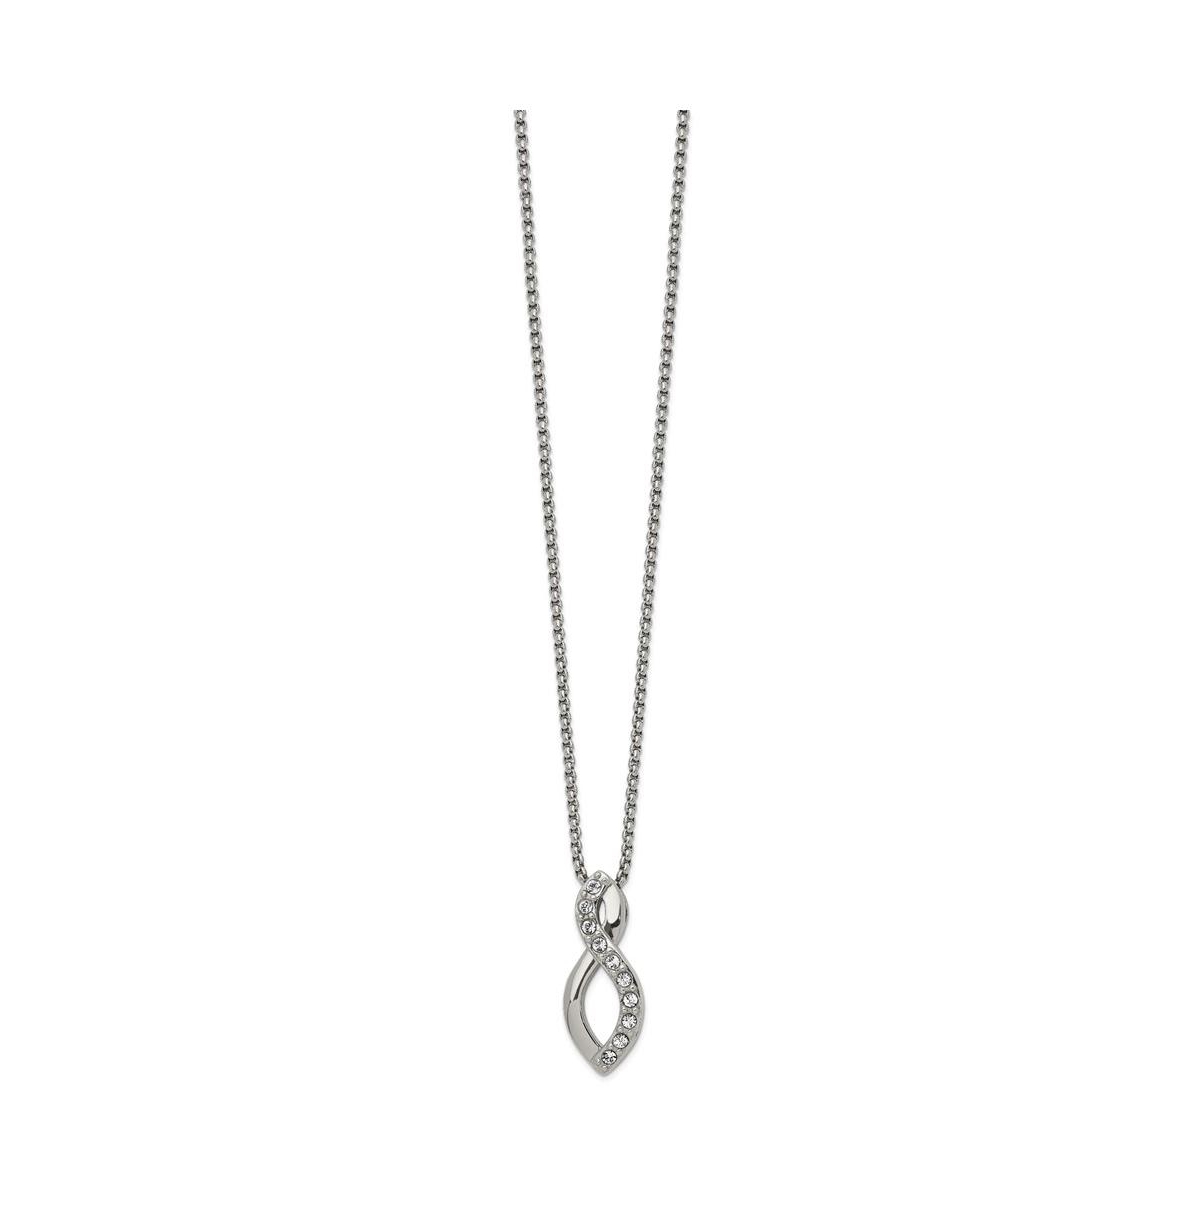 Crystals from Swarovski Infinity Symbol Box Chain Necklace - Silver